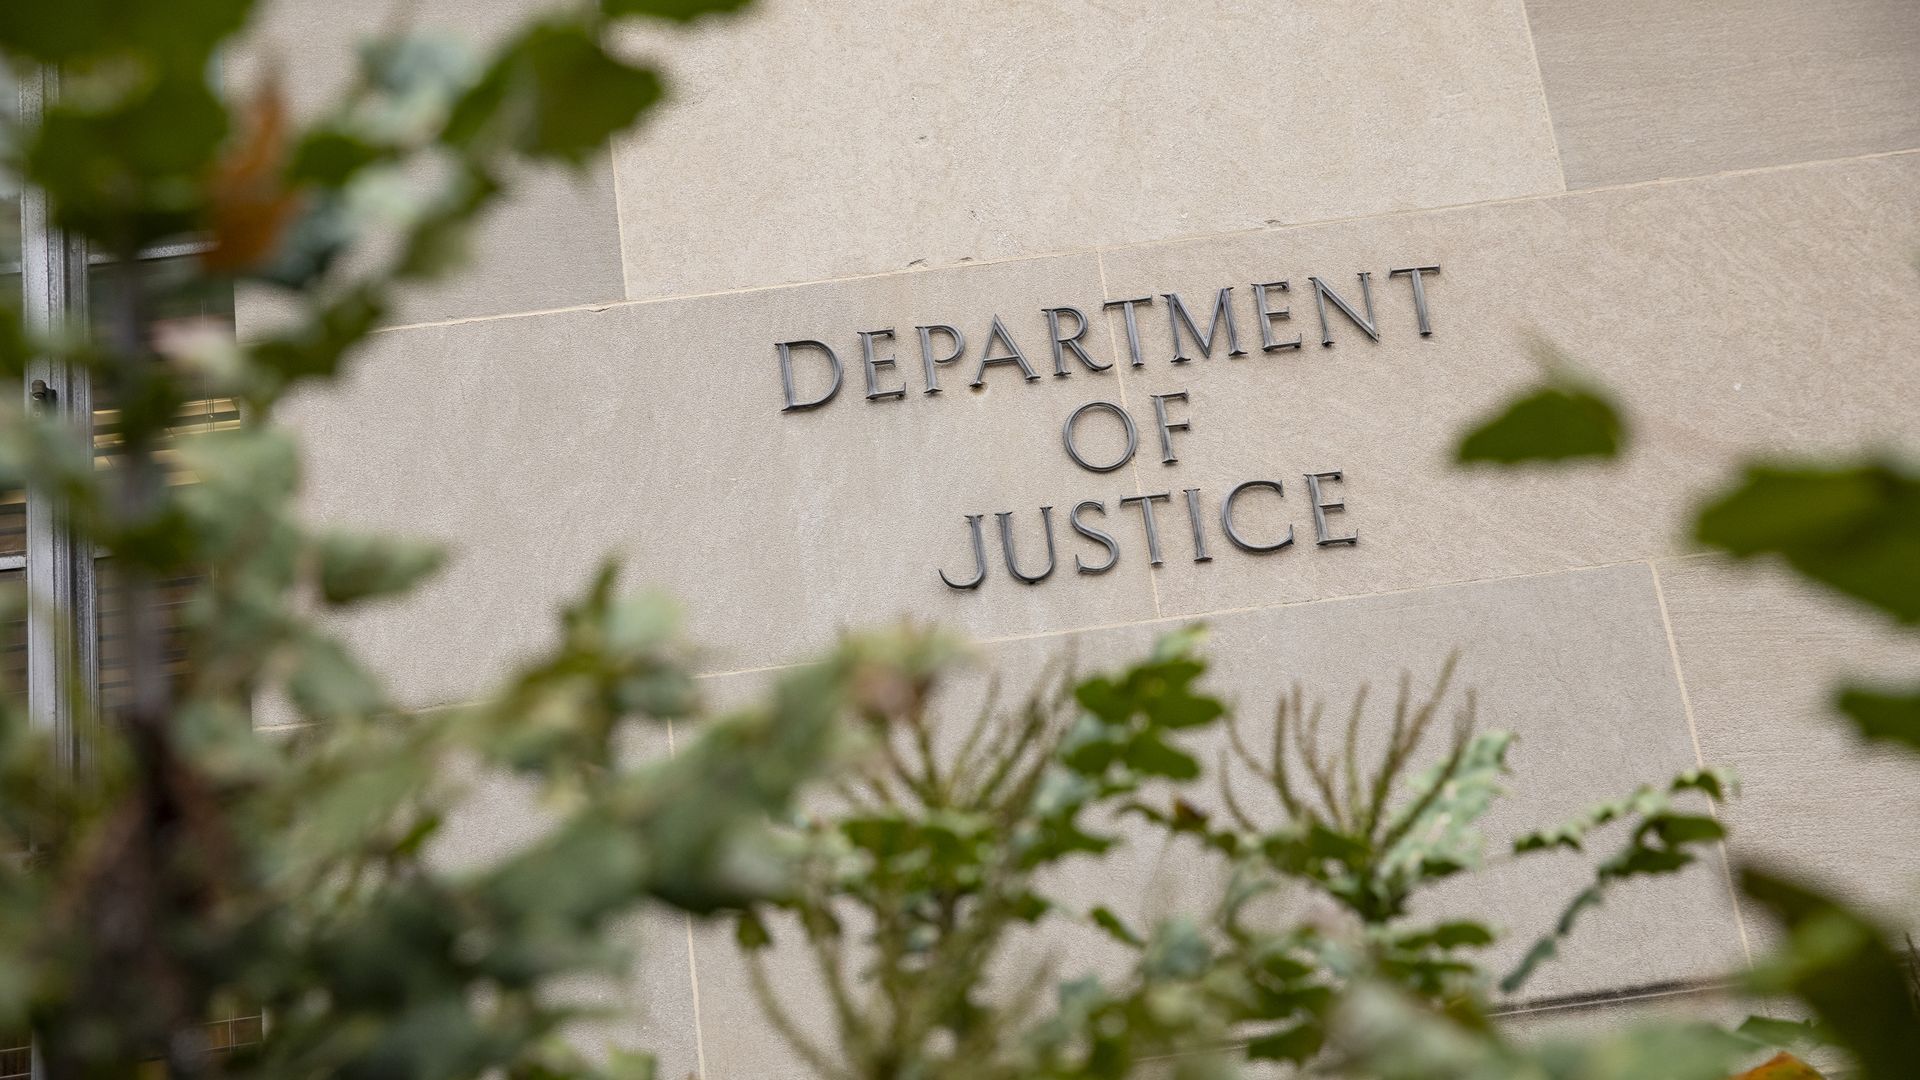 Photo of the exterior of the DOJ building, which has "Department of Justice" displayed